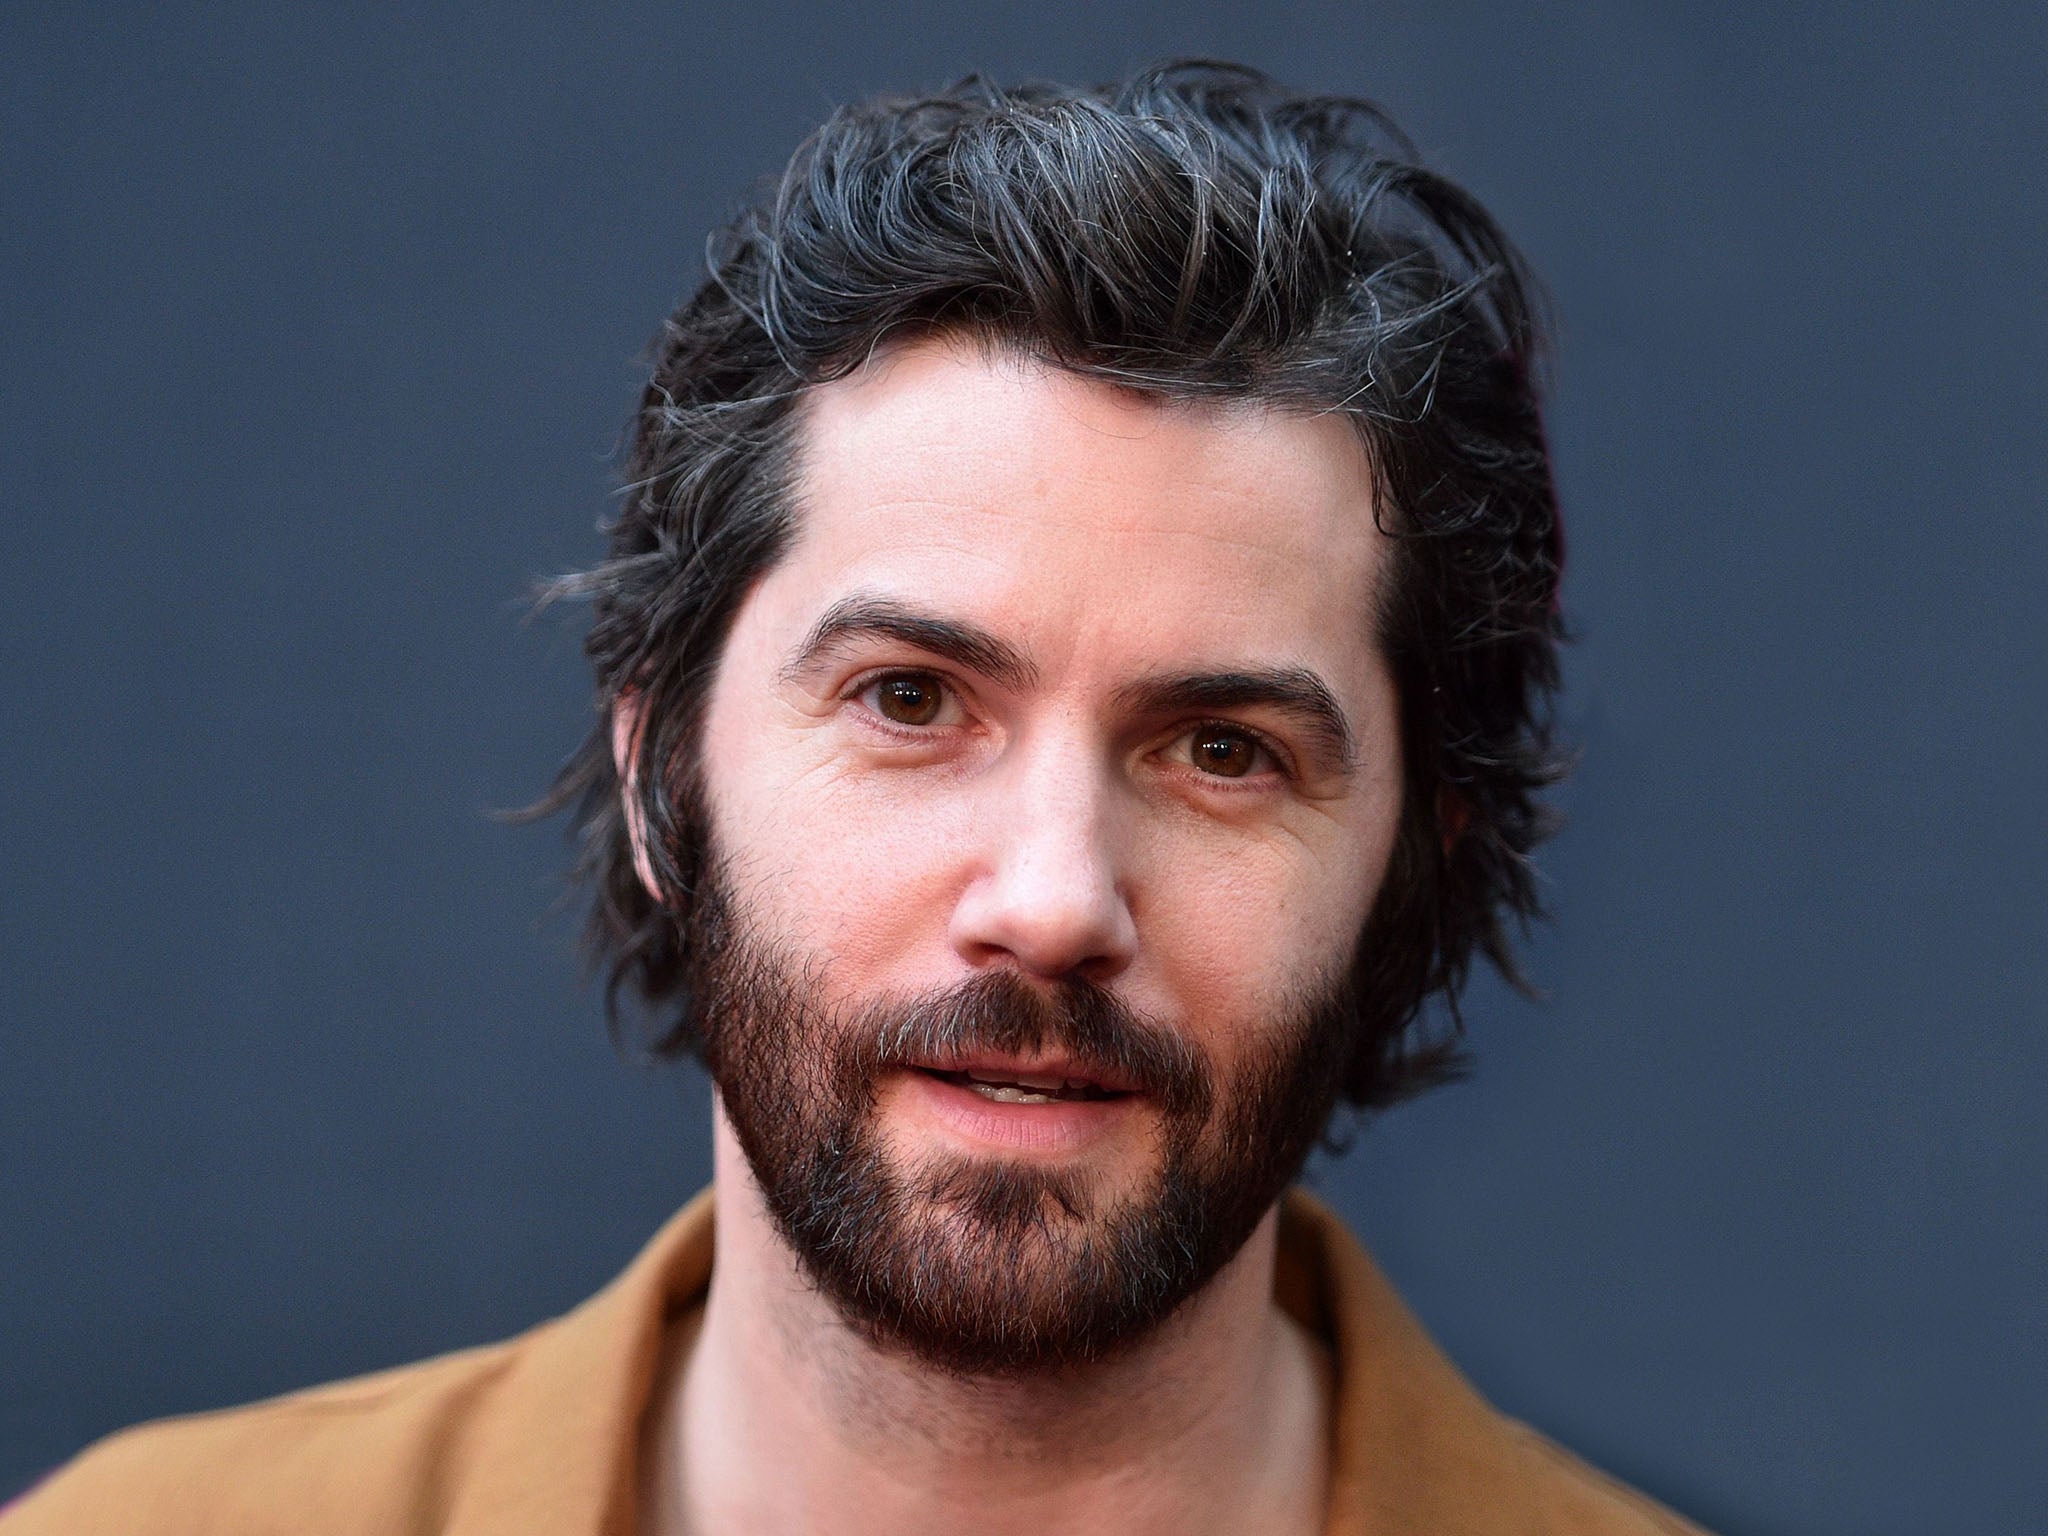 Jim Sturgess: ‘Fame freaked me out – I didn’t enjoy seeing myself on the sides of buses’